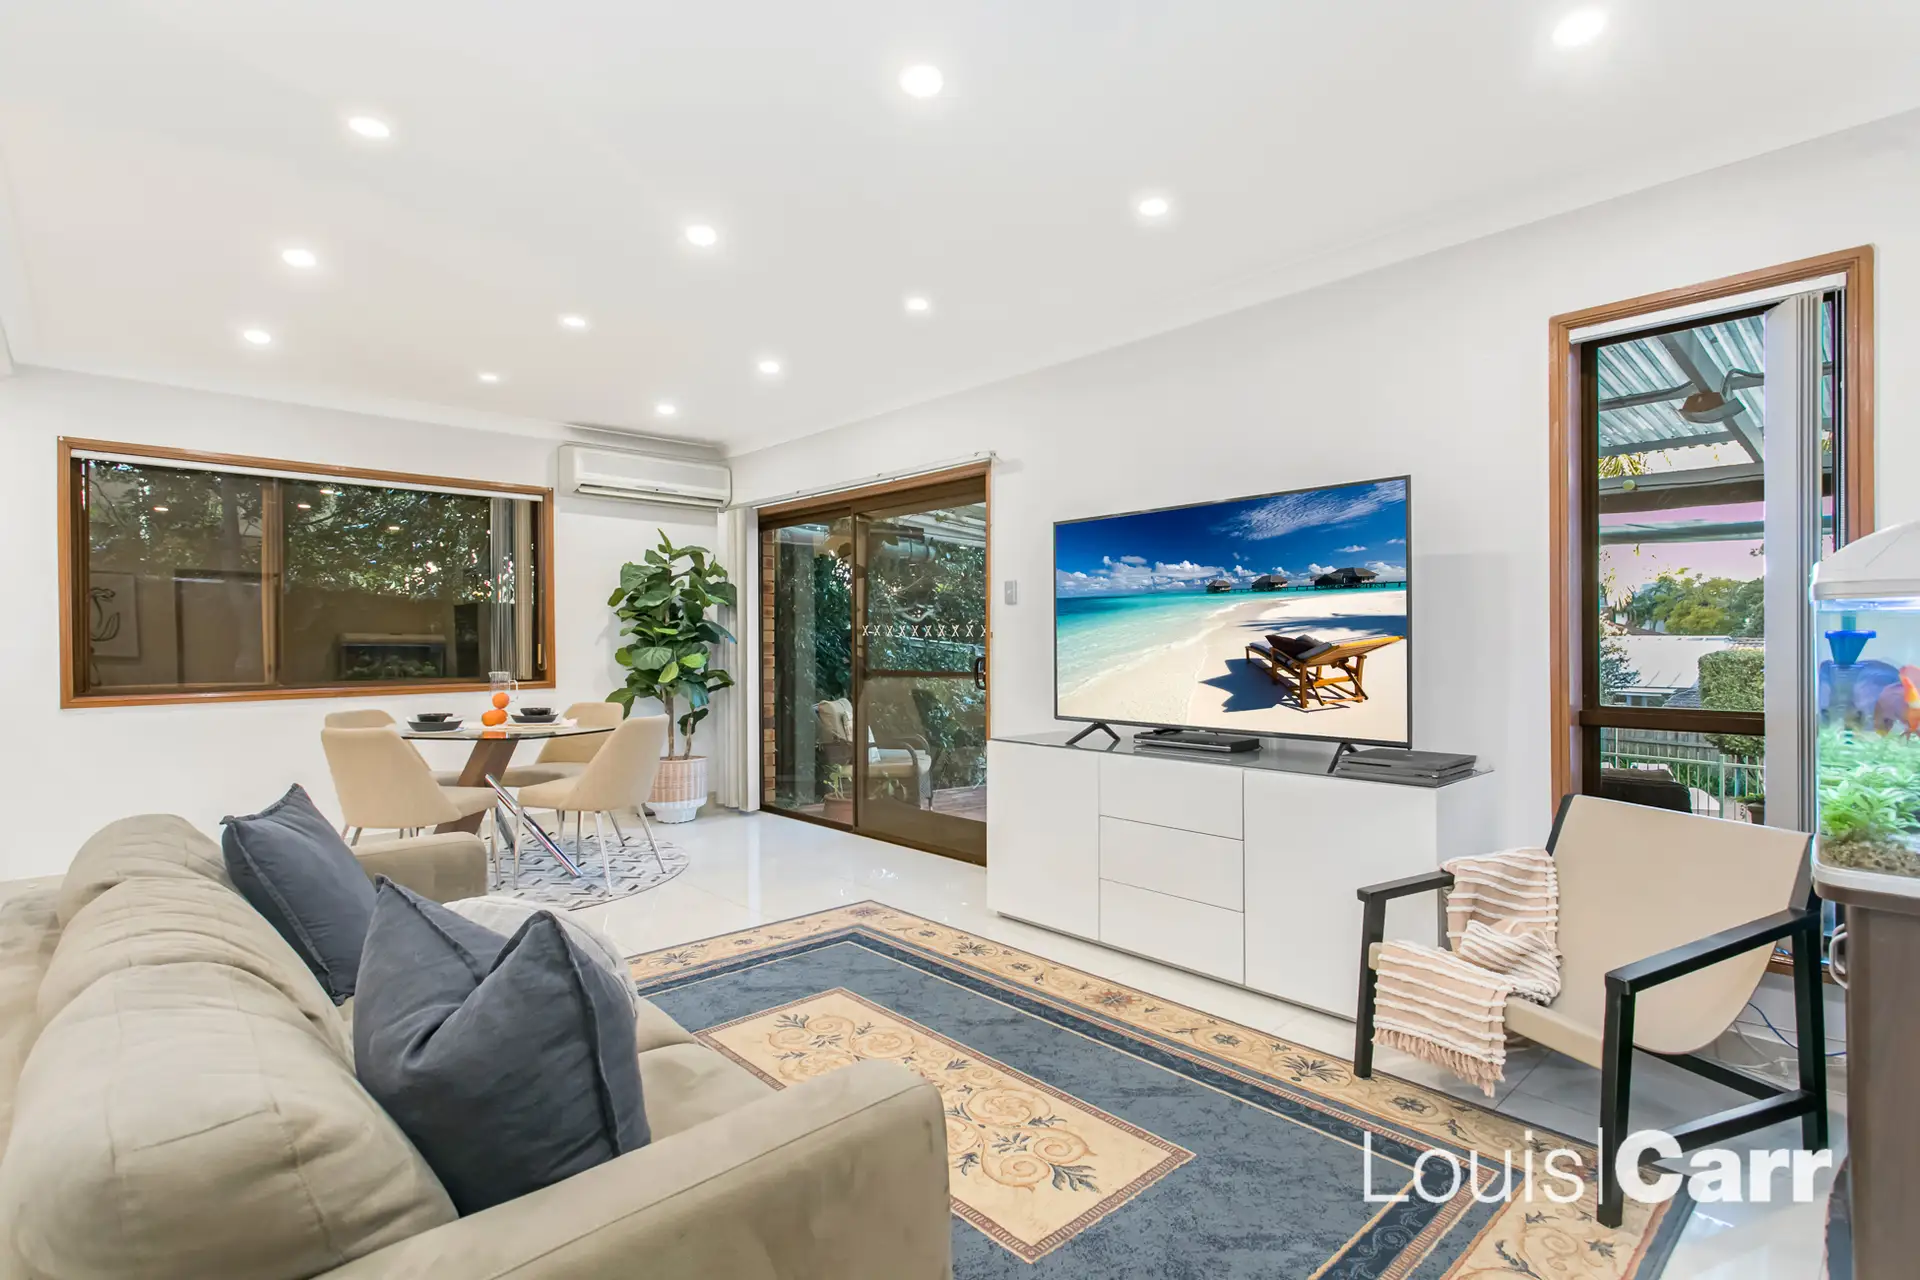 Photo #5: 12 Isobell Avenue, West Pennant Hills - Sold by Louis Carr Real Estate